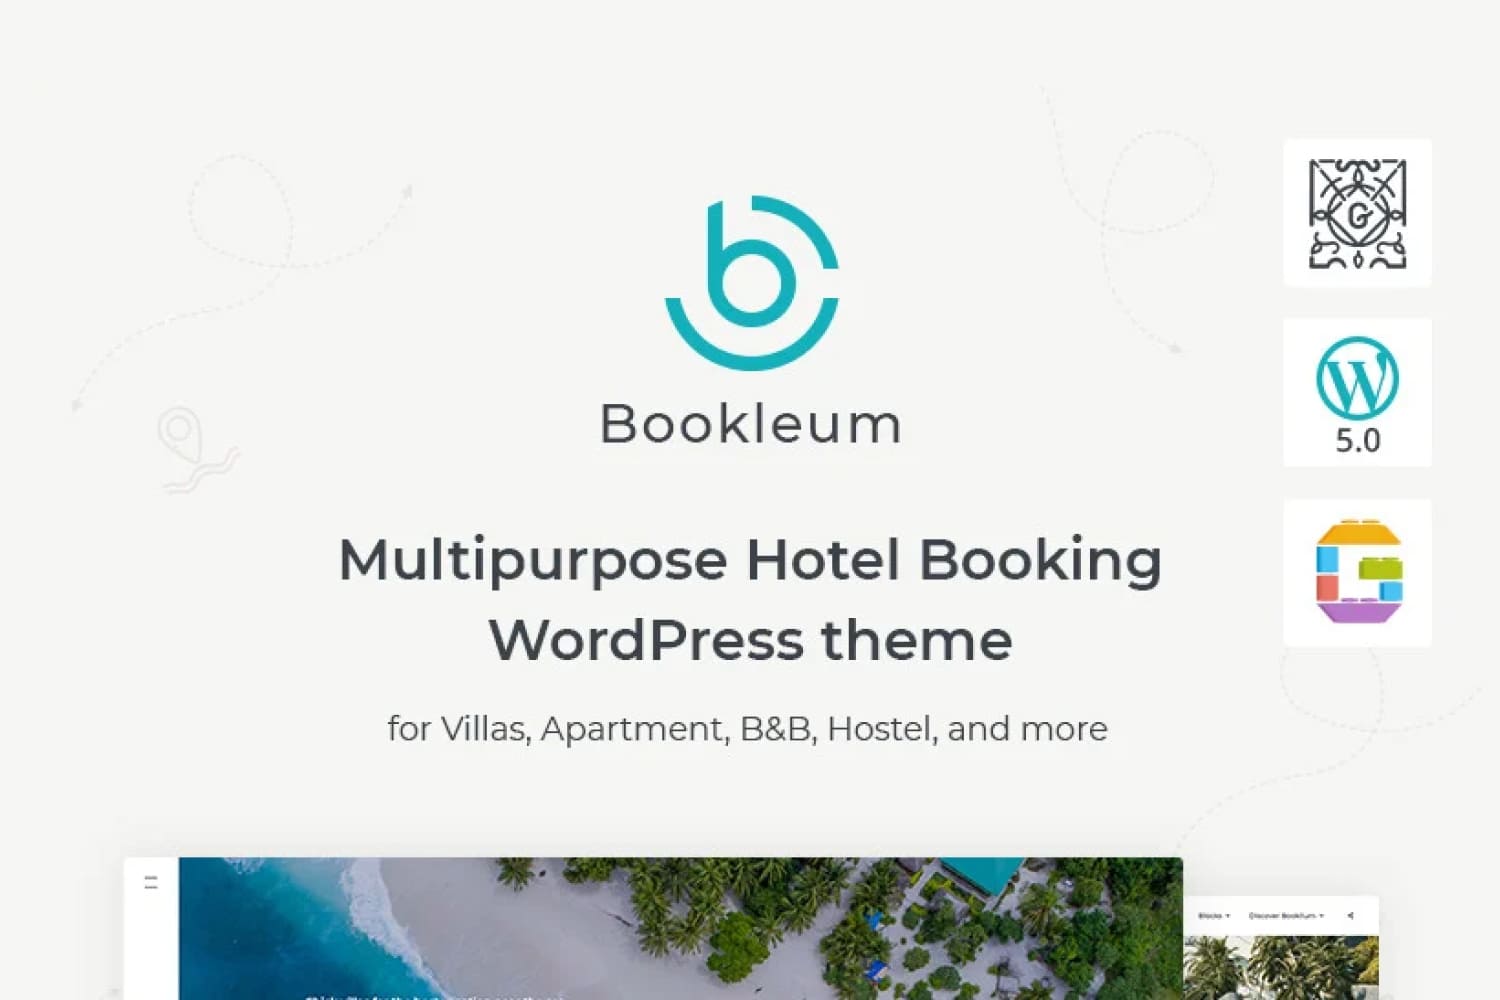 The main page of the site for the hotel with logos.